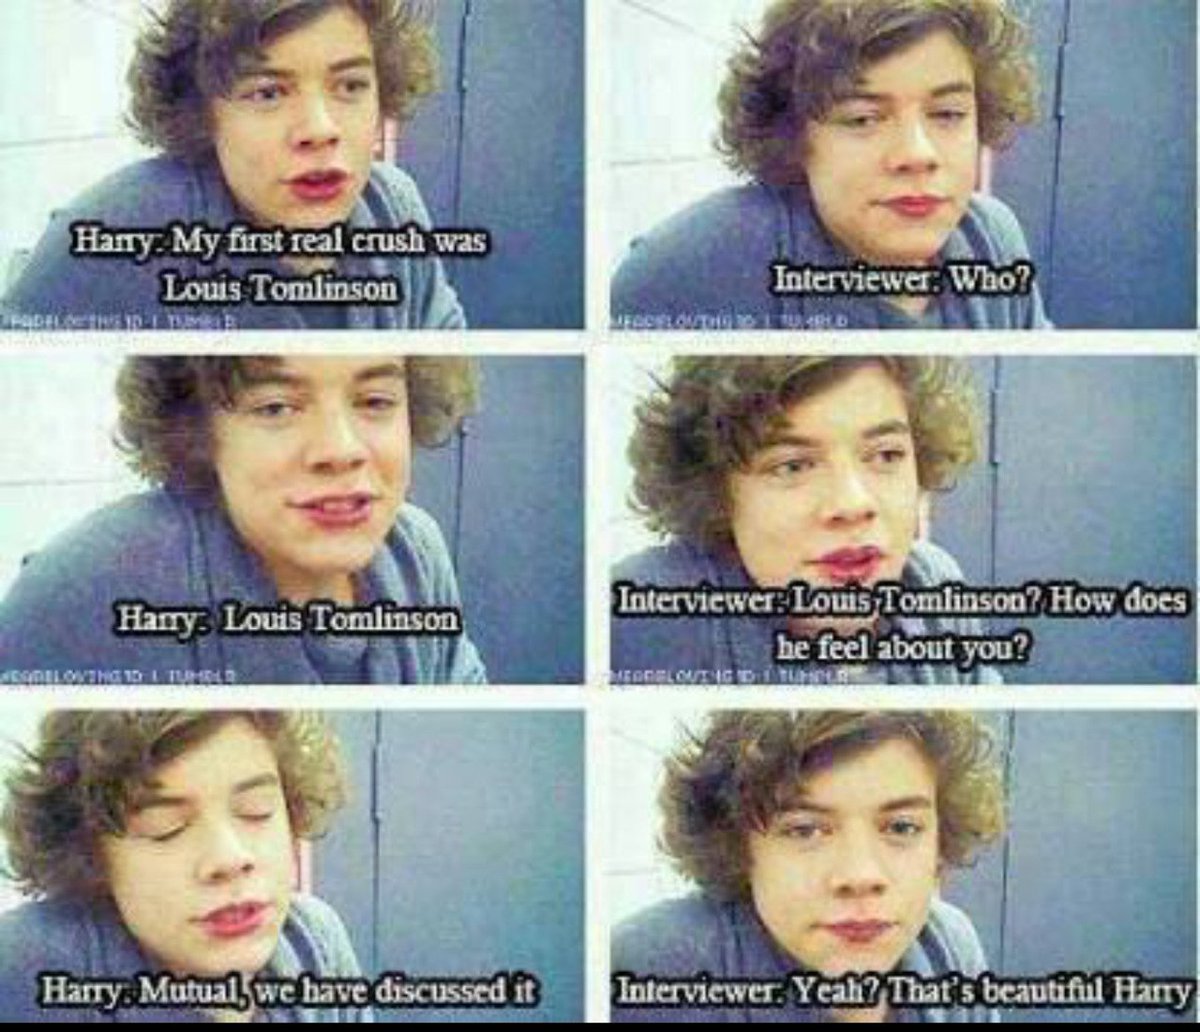 Of course it points to H. It always has. Harry told us his first crush was Louis Tomlinson, that they were dating. Clear as day.